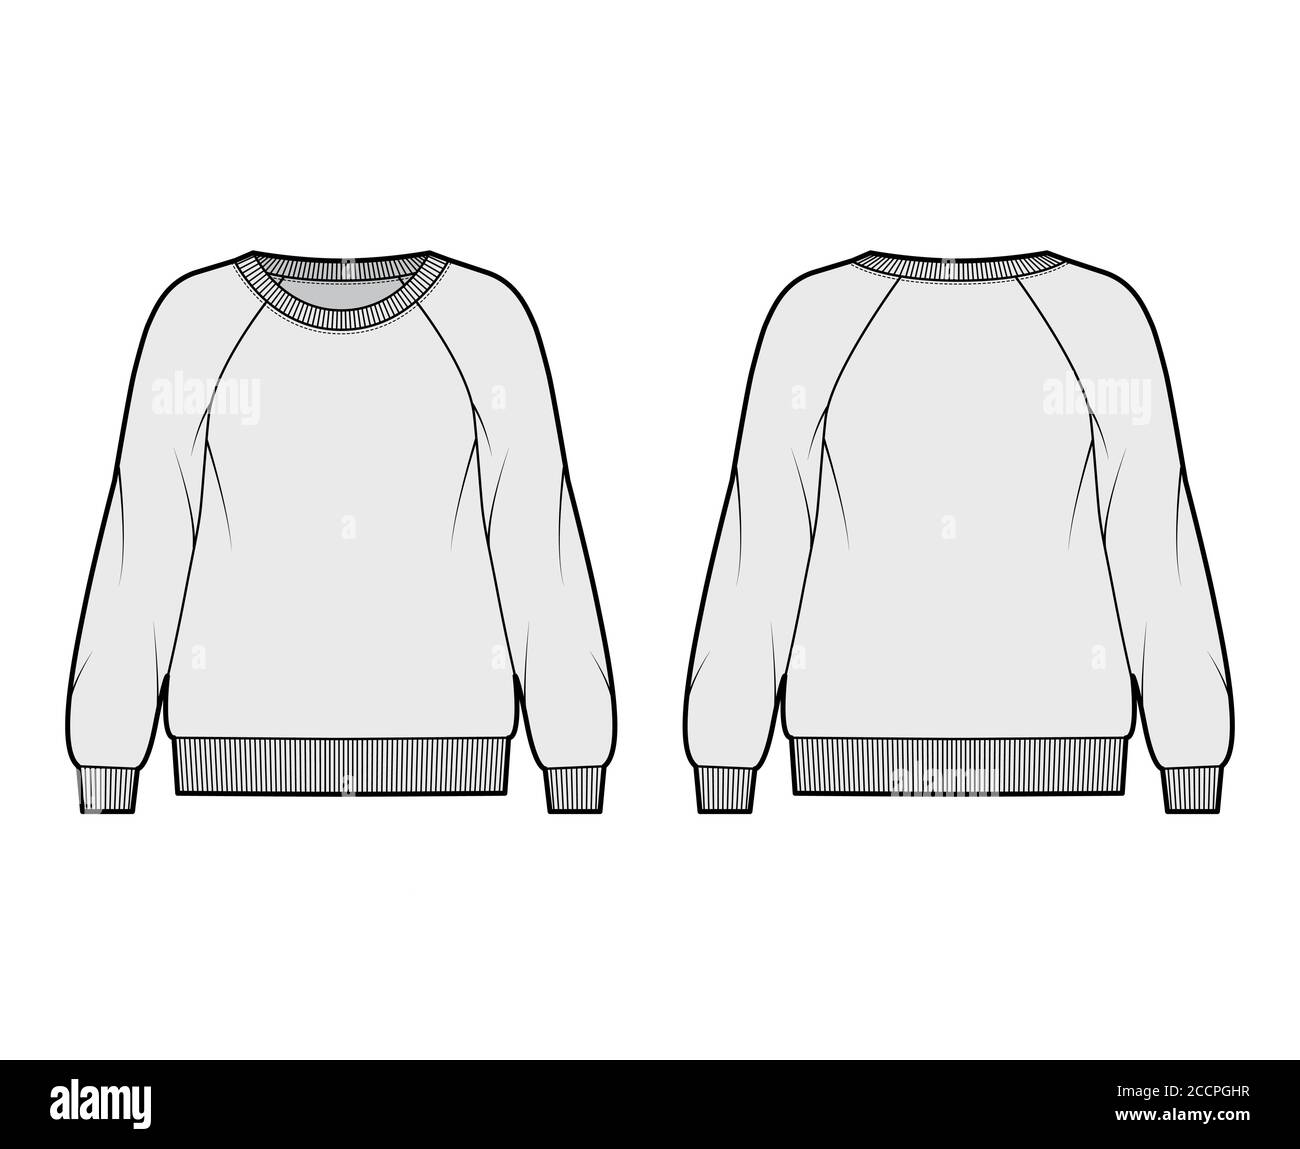 Oversized cotton-terry sweatshirt technical fashion illustration with scoop neckline, long raglan sleeves, ribbed trims. Flat jumper apparel template front back grey color. Women, men unisex top CAD Stock Vector